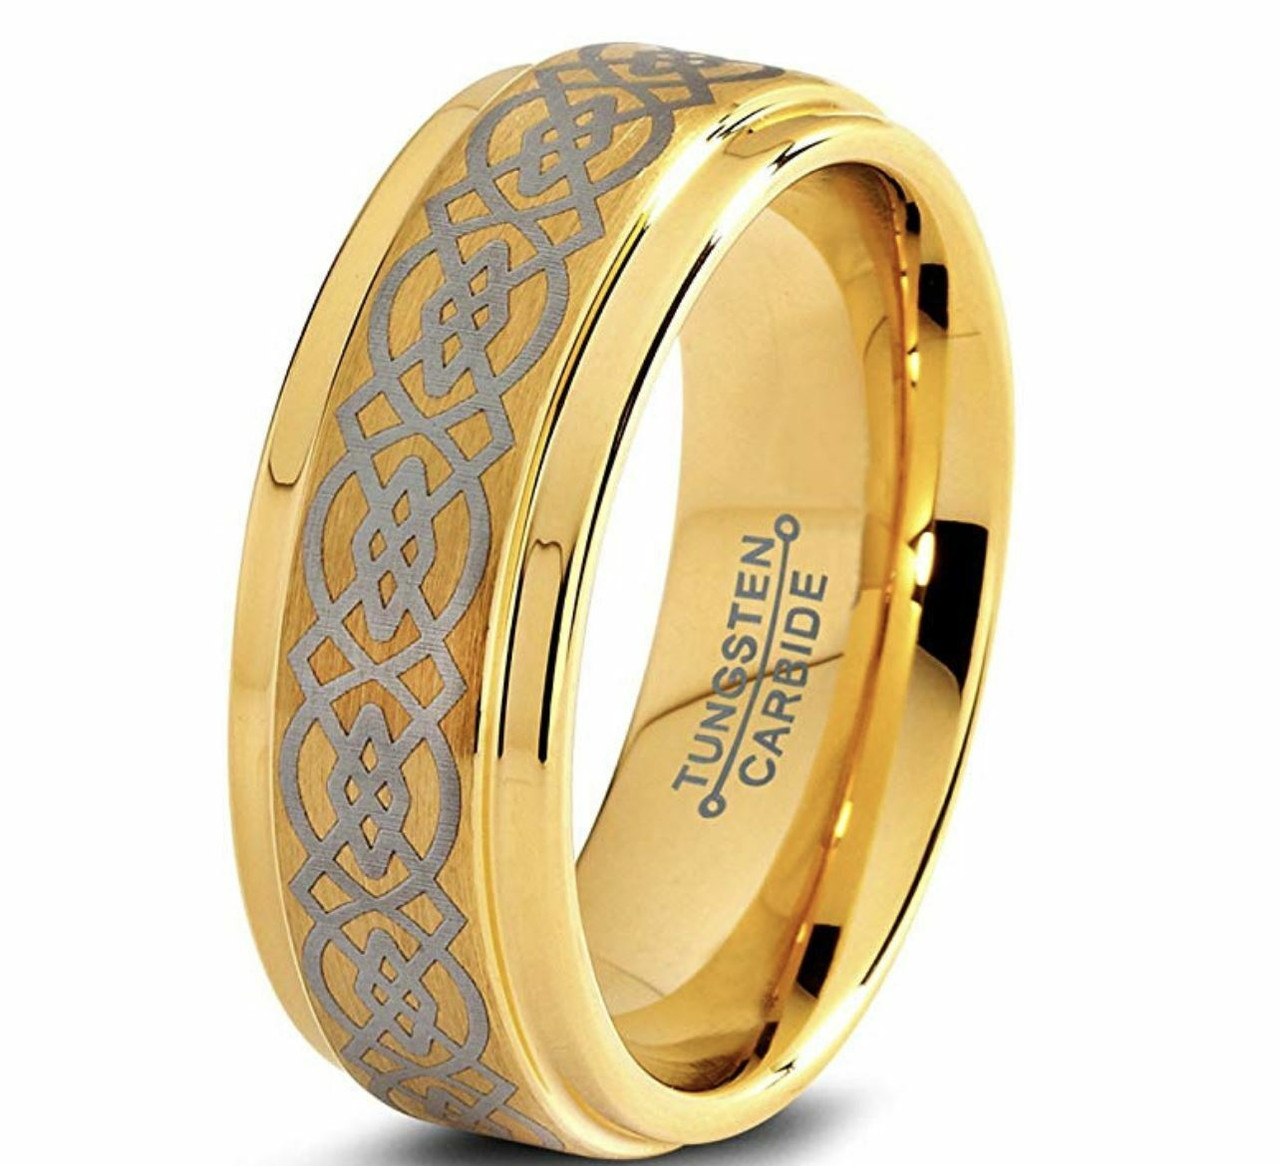 (8mm) Unisex or Men's Tungsten Carbide Wedding Ring Band. Laser Etched Gold Celtic Knot Ring with Beveled Edges.